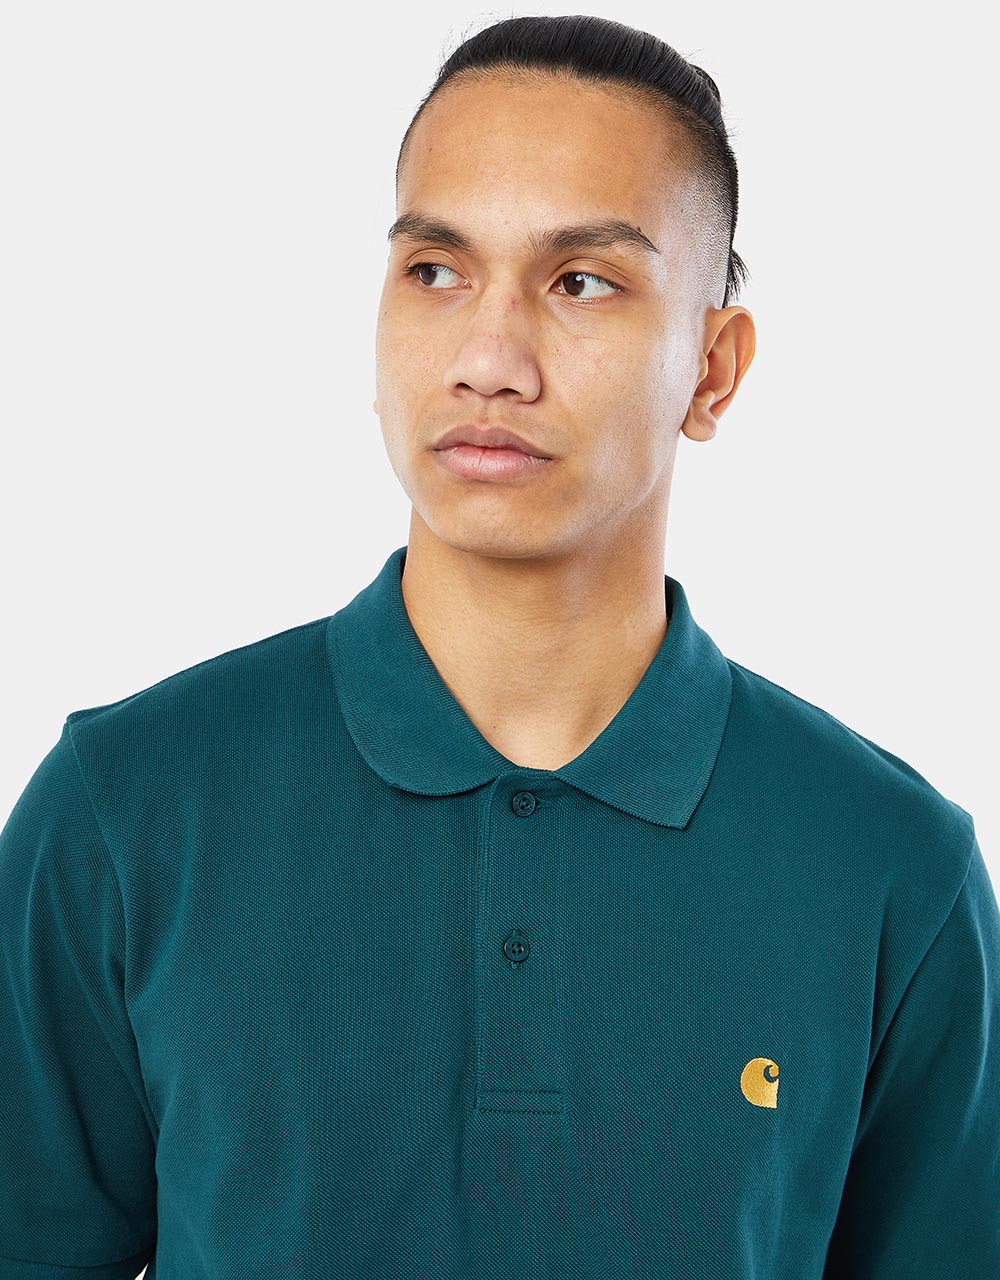 Carhartt WIP S/S Chase Pique Polo - Botanic/Gold